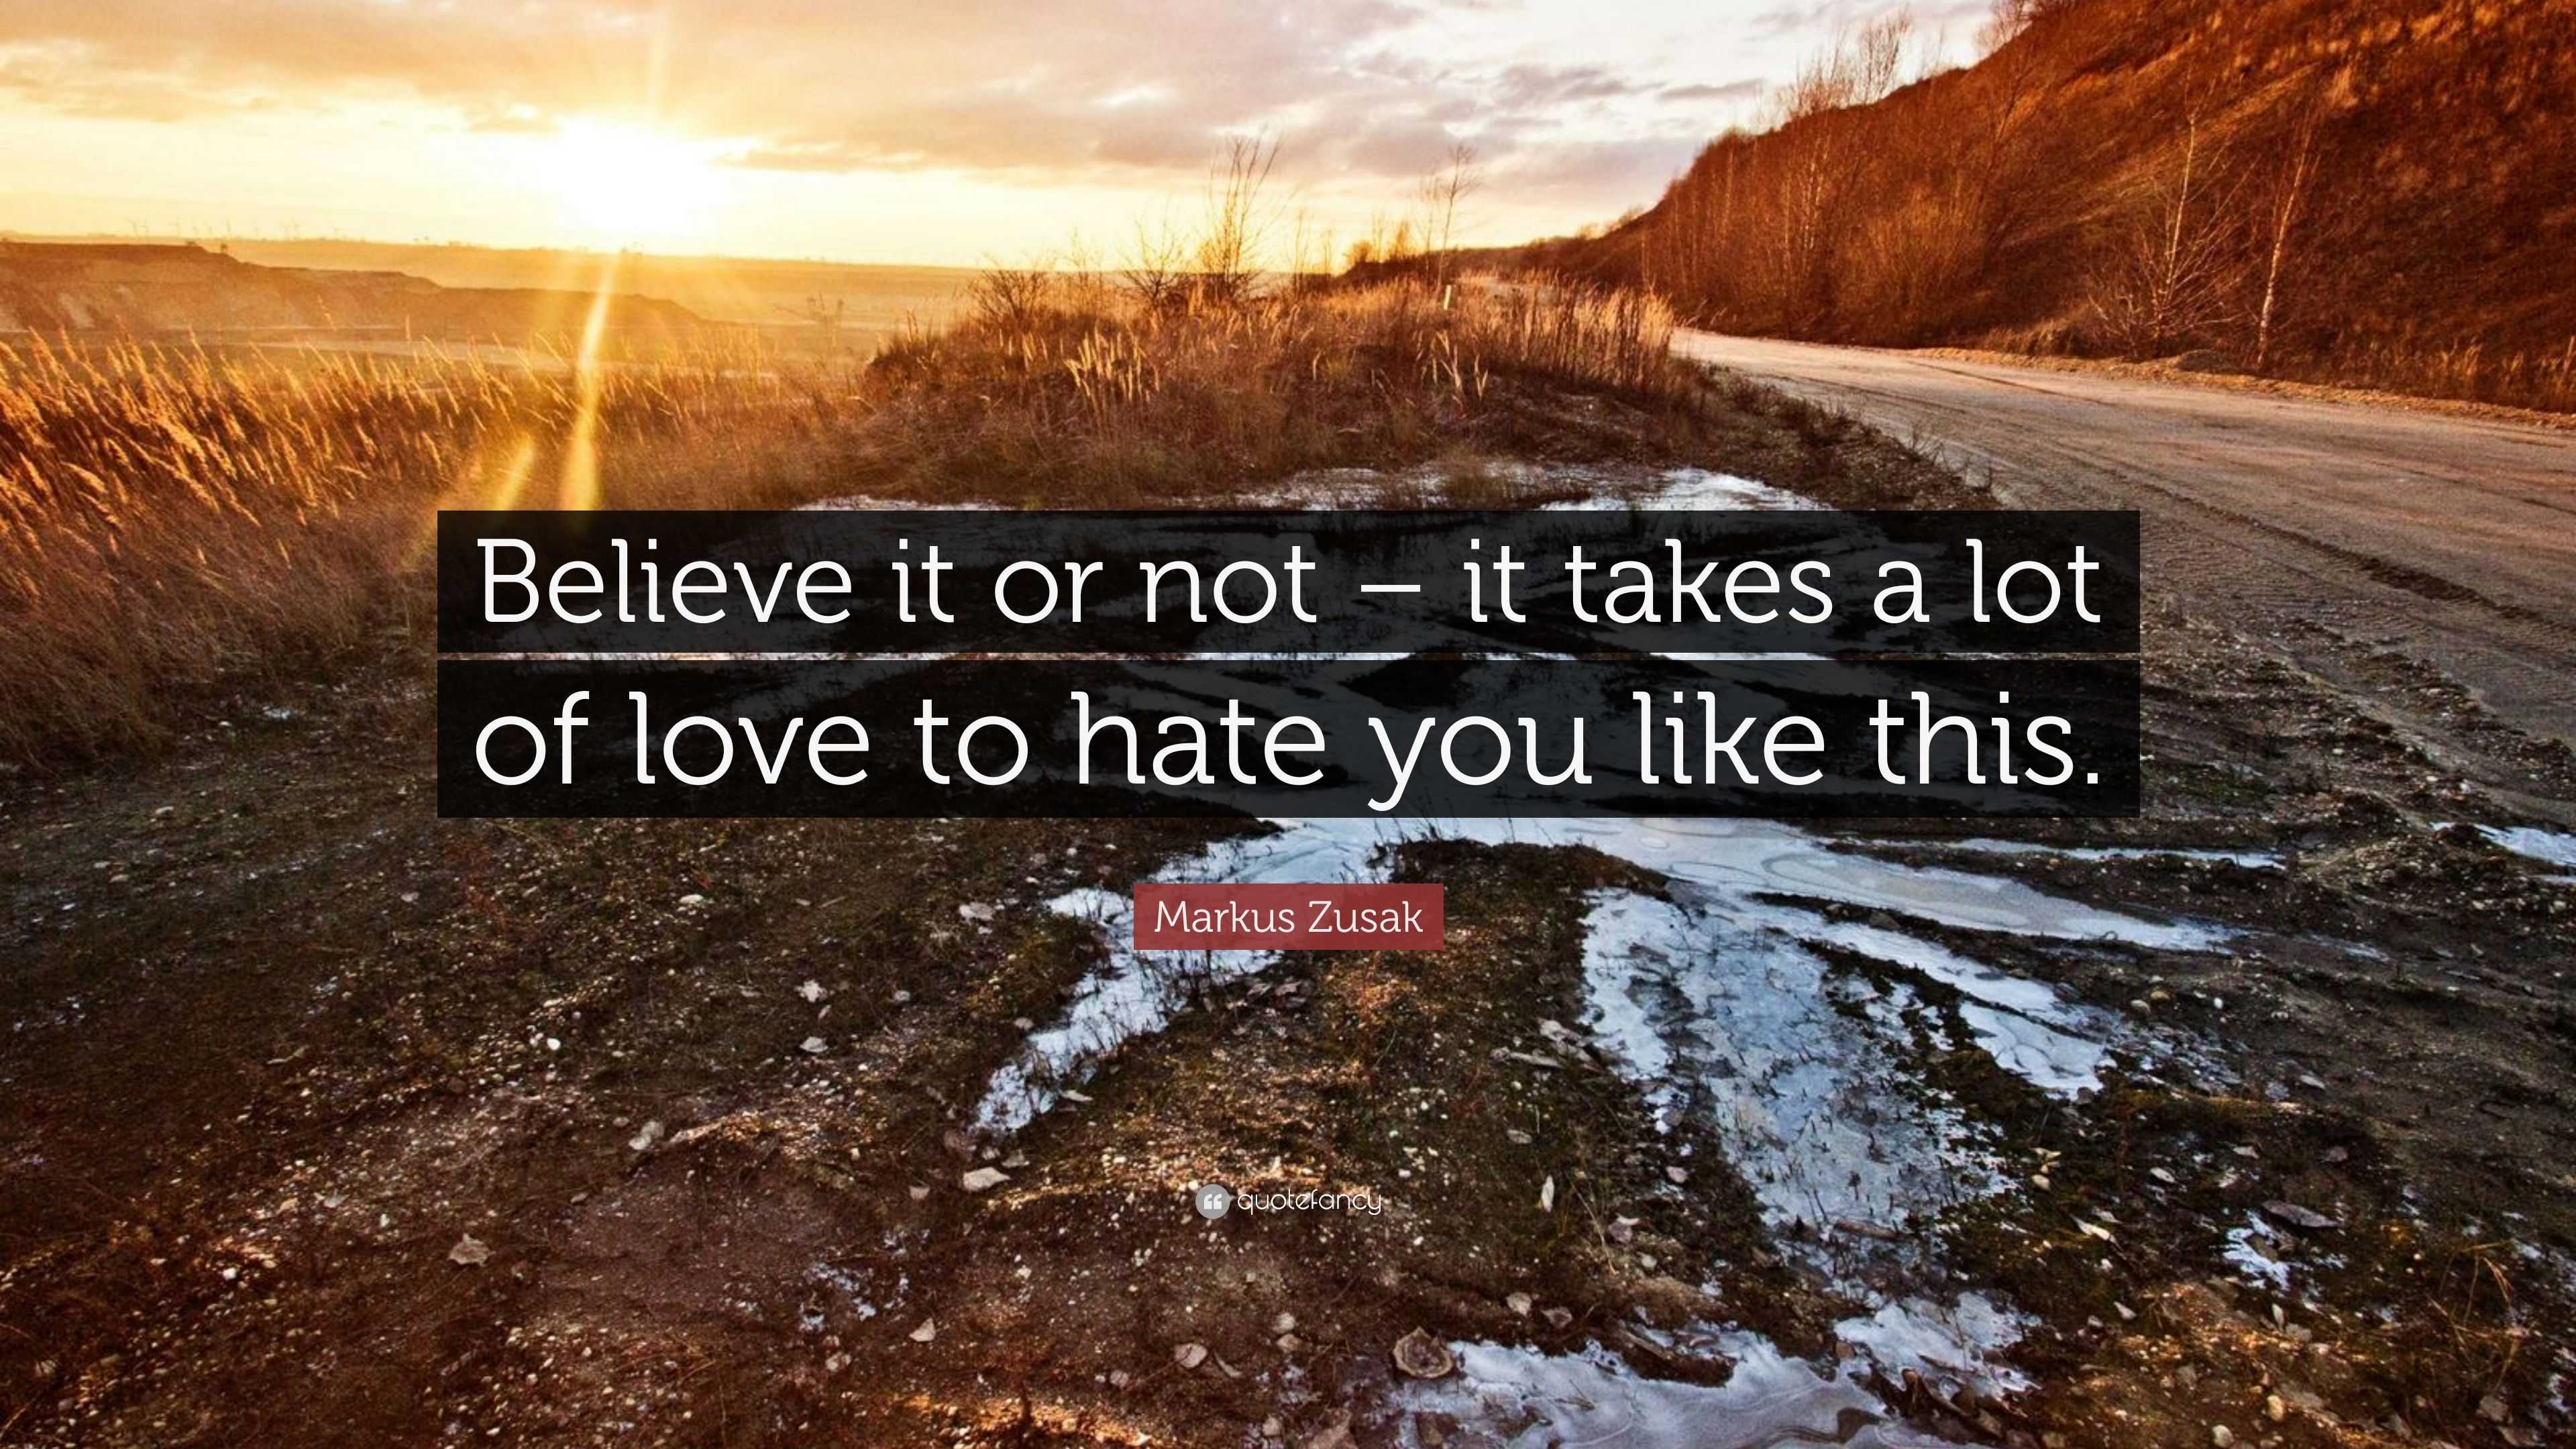 Markus Zusak Quote “Believe it or not – it takes a lot of love